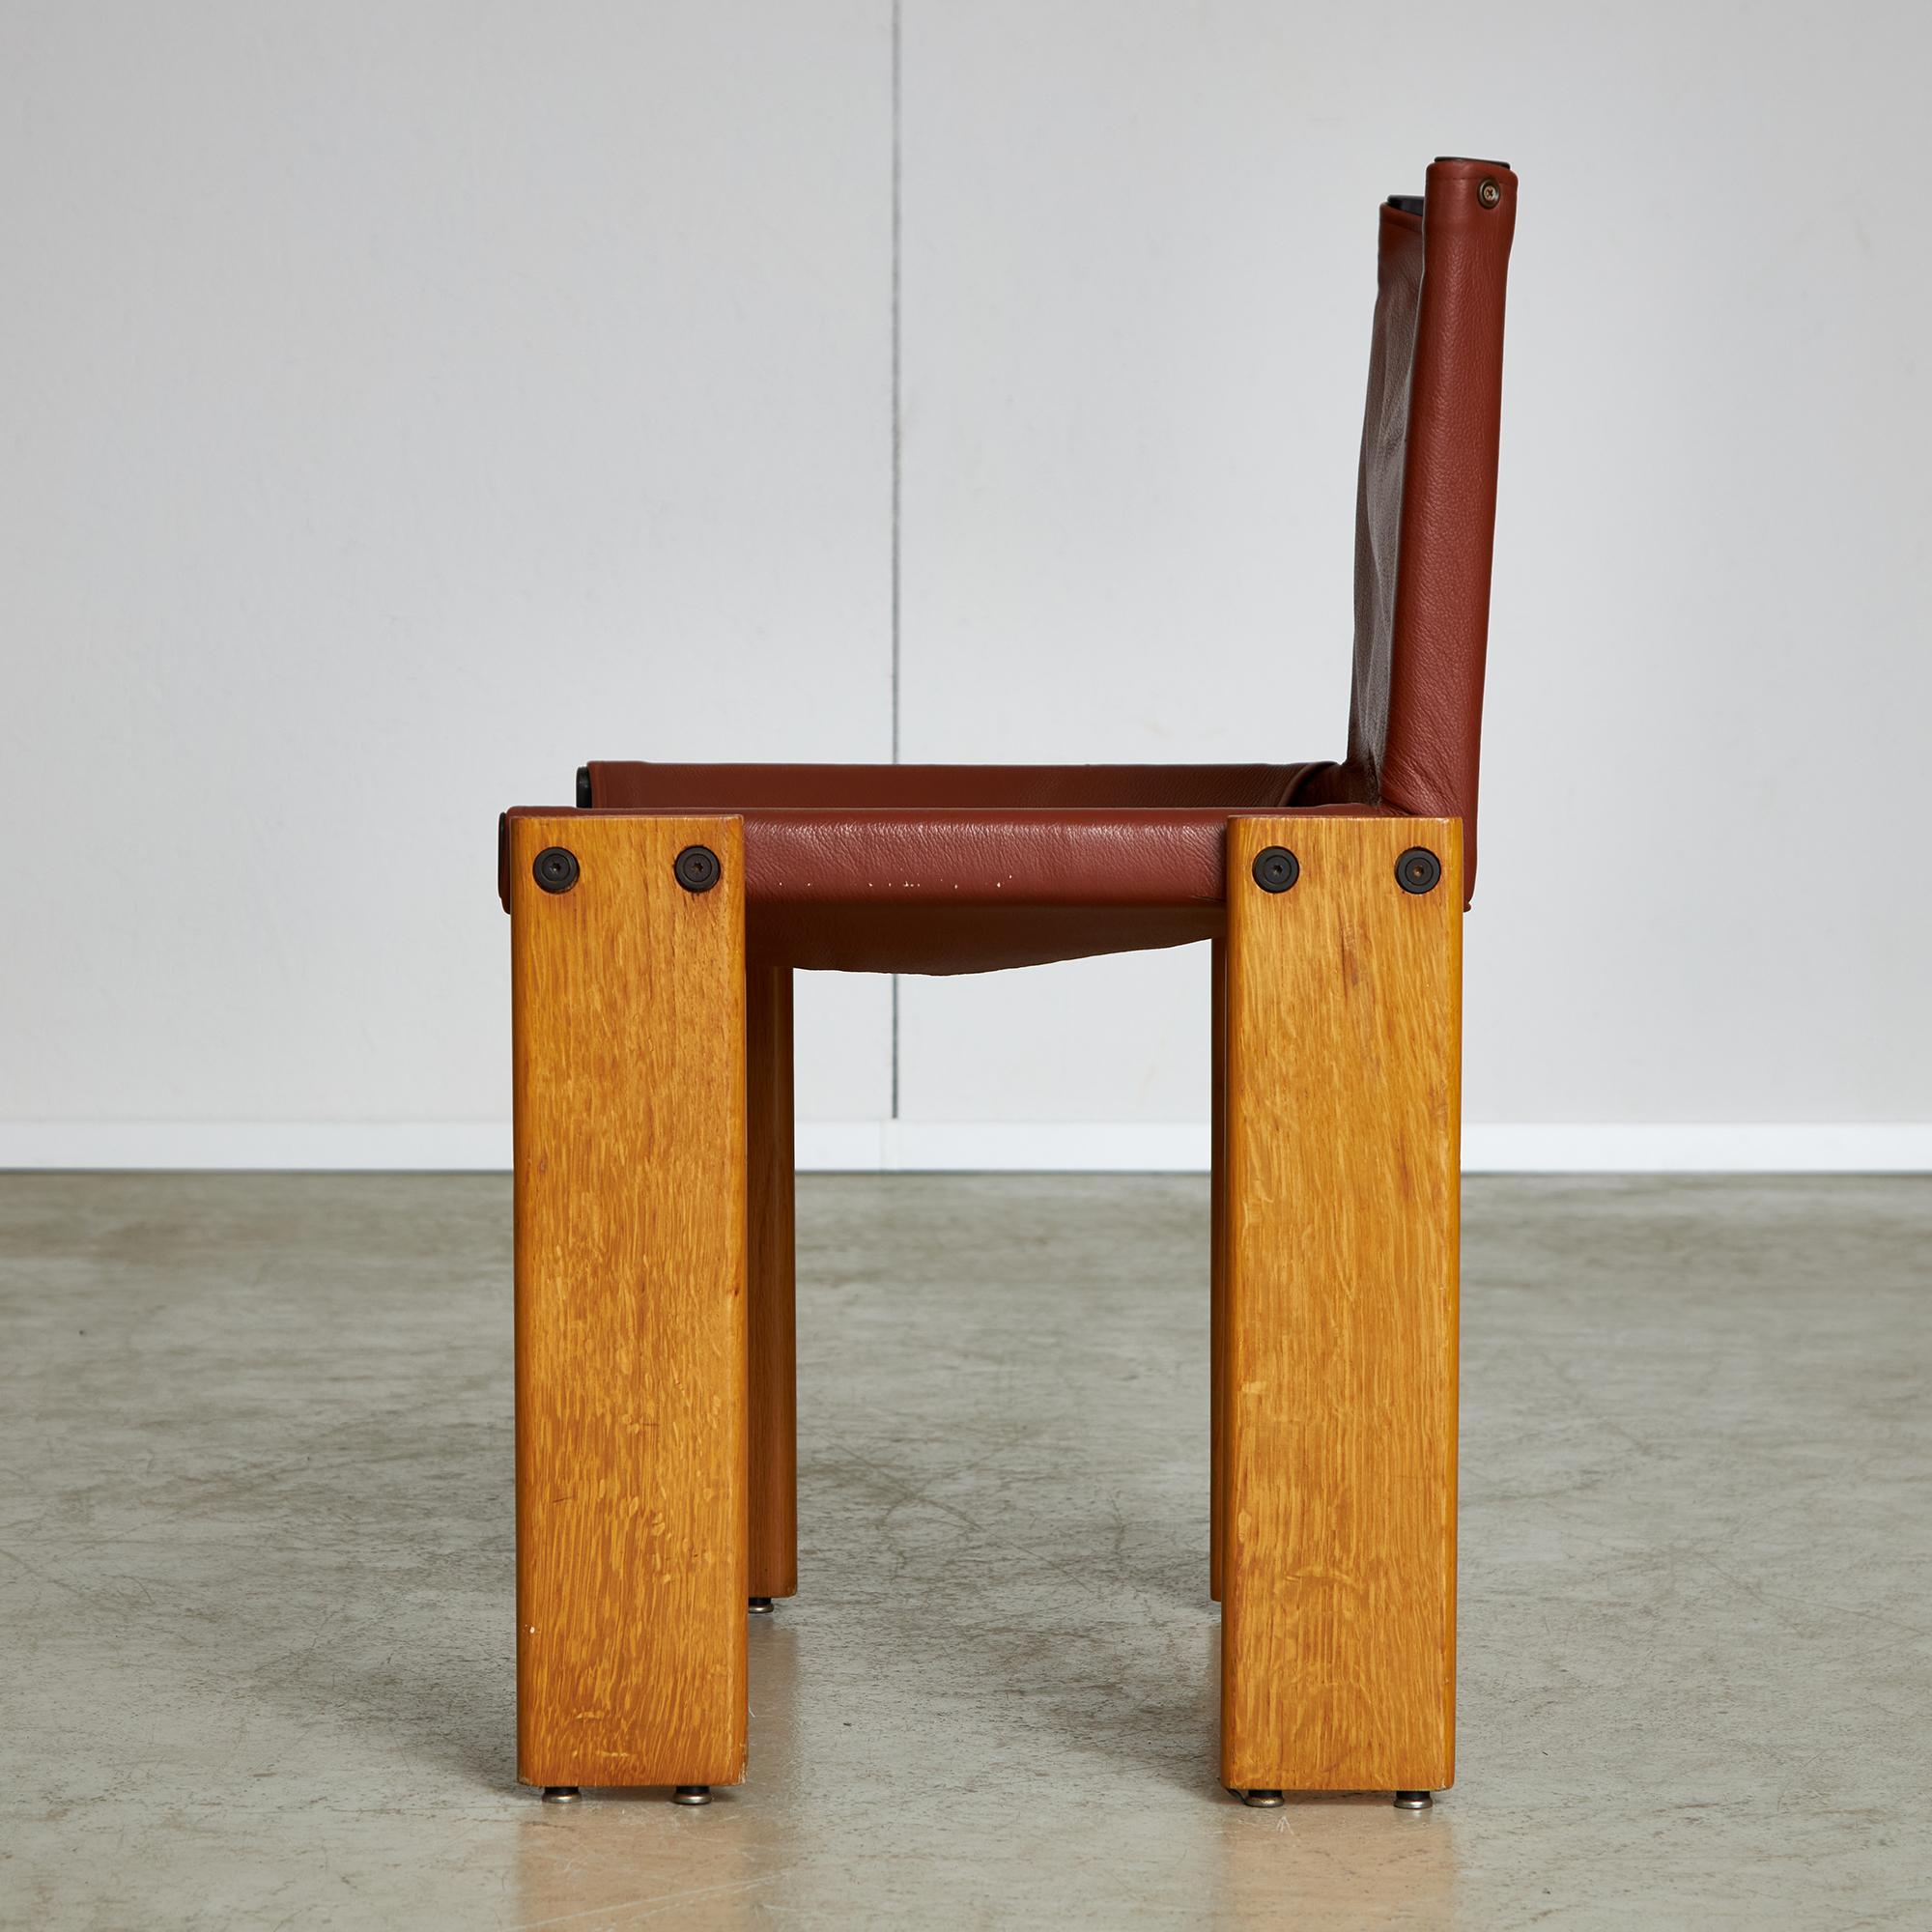 Italian Set of Monk Chairs by Afra and Tobia Scarpa for Molteni, 1973 For Sale